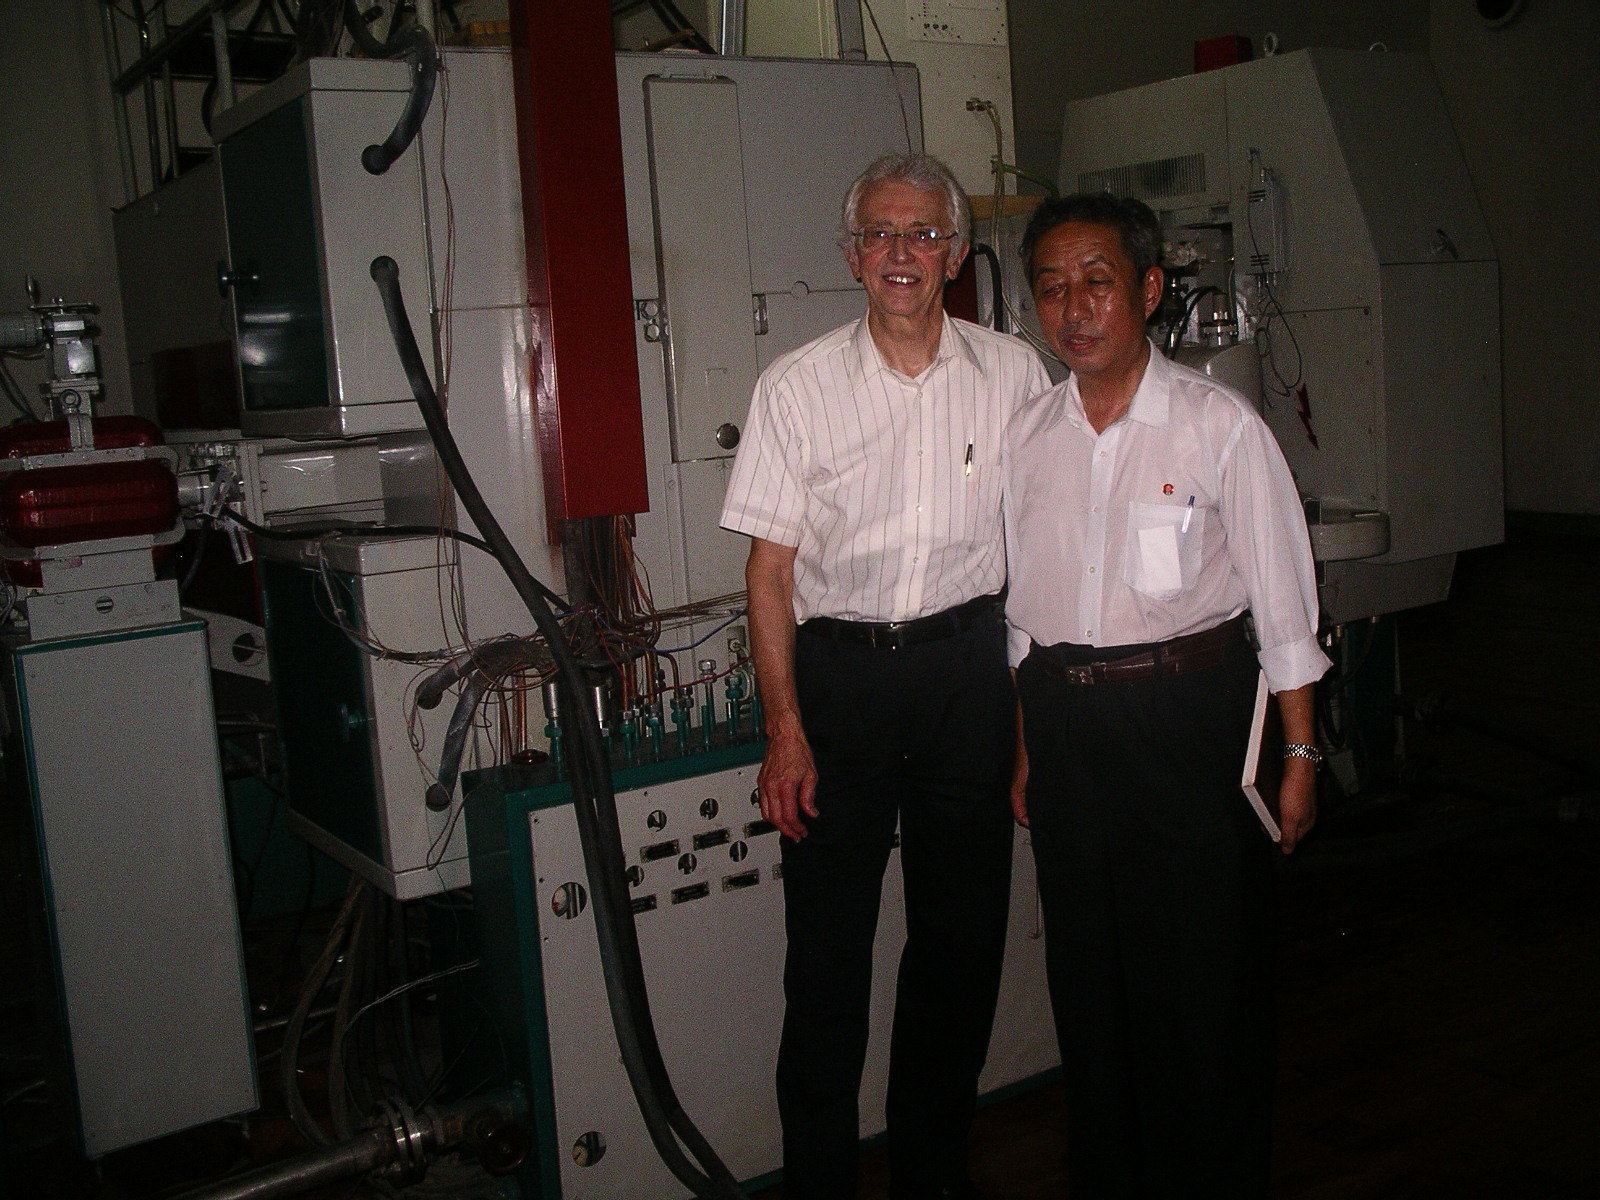 Two men posing for a photo in a scientific lab setting